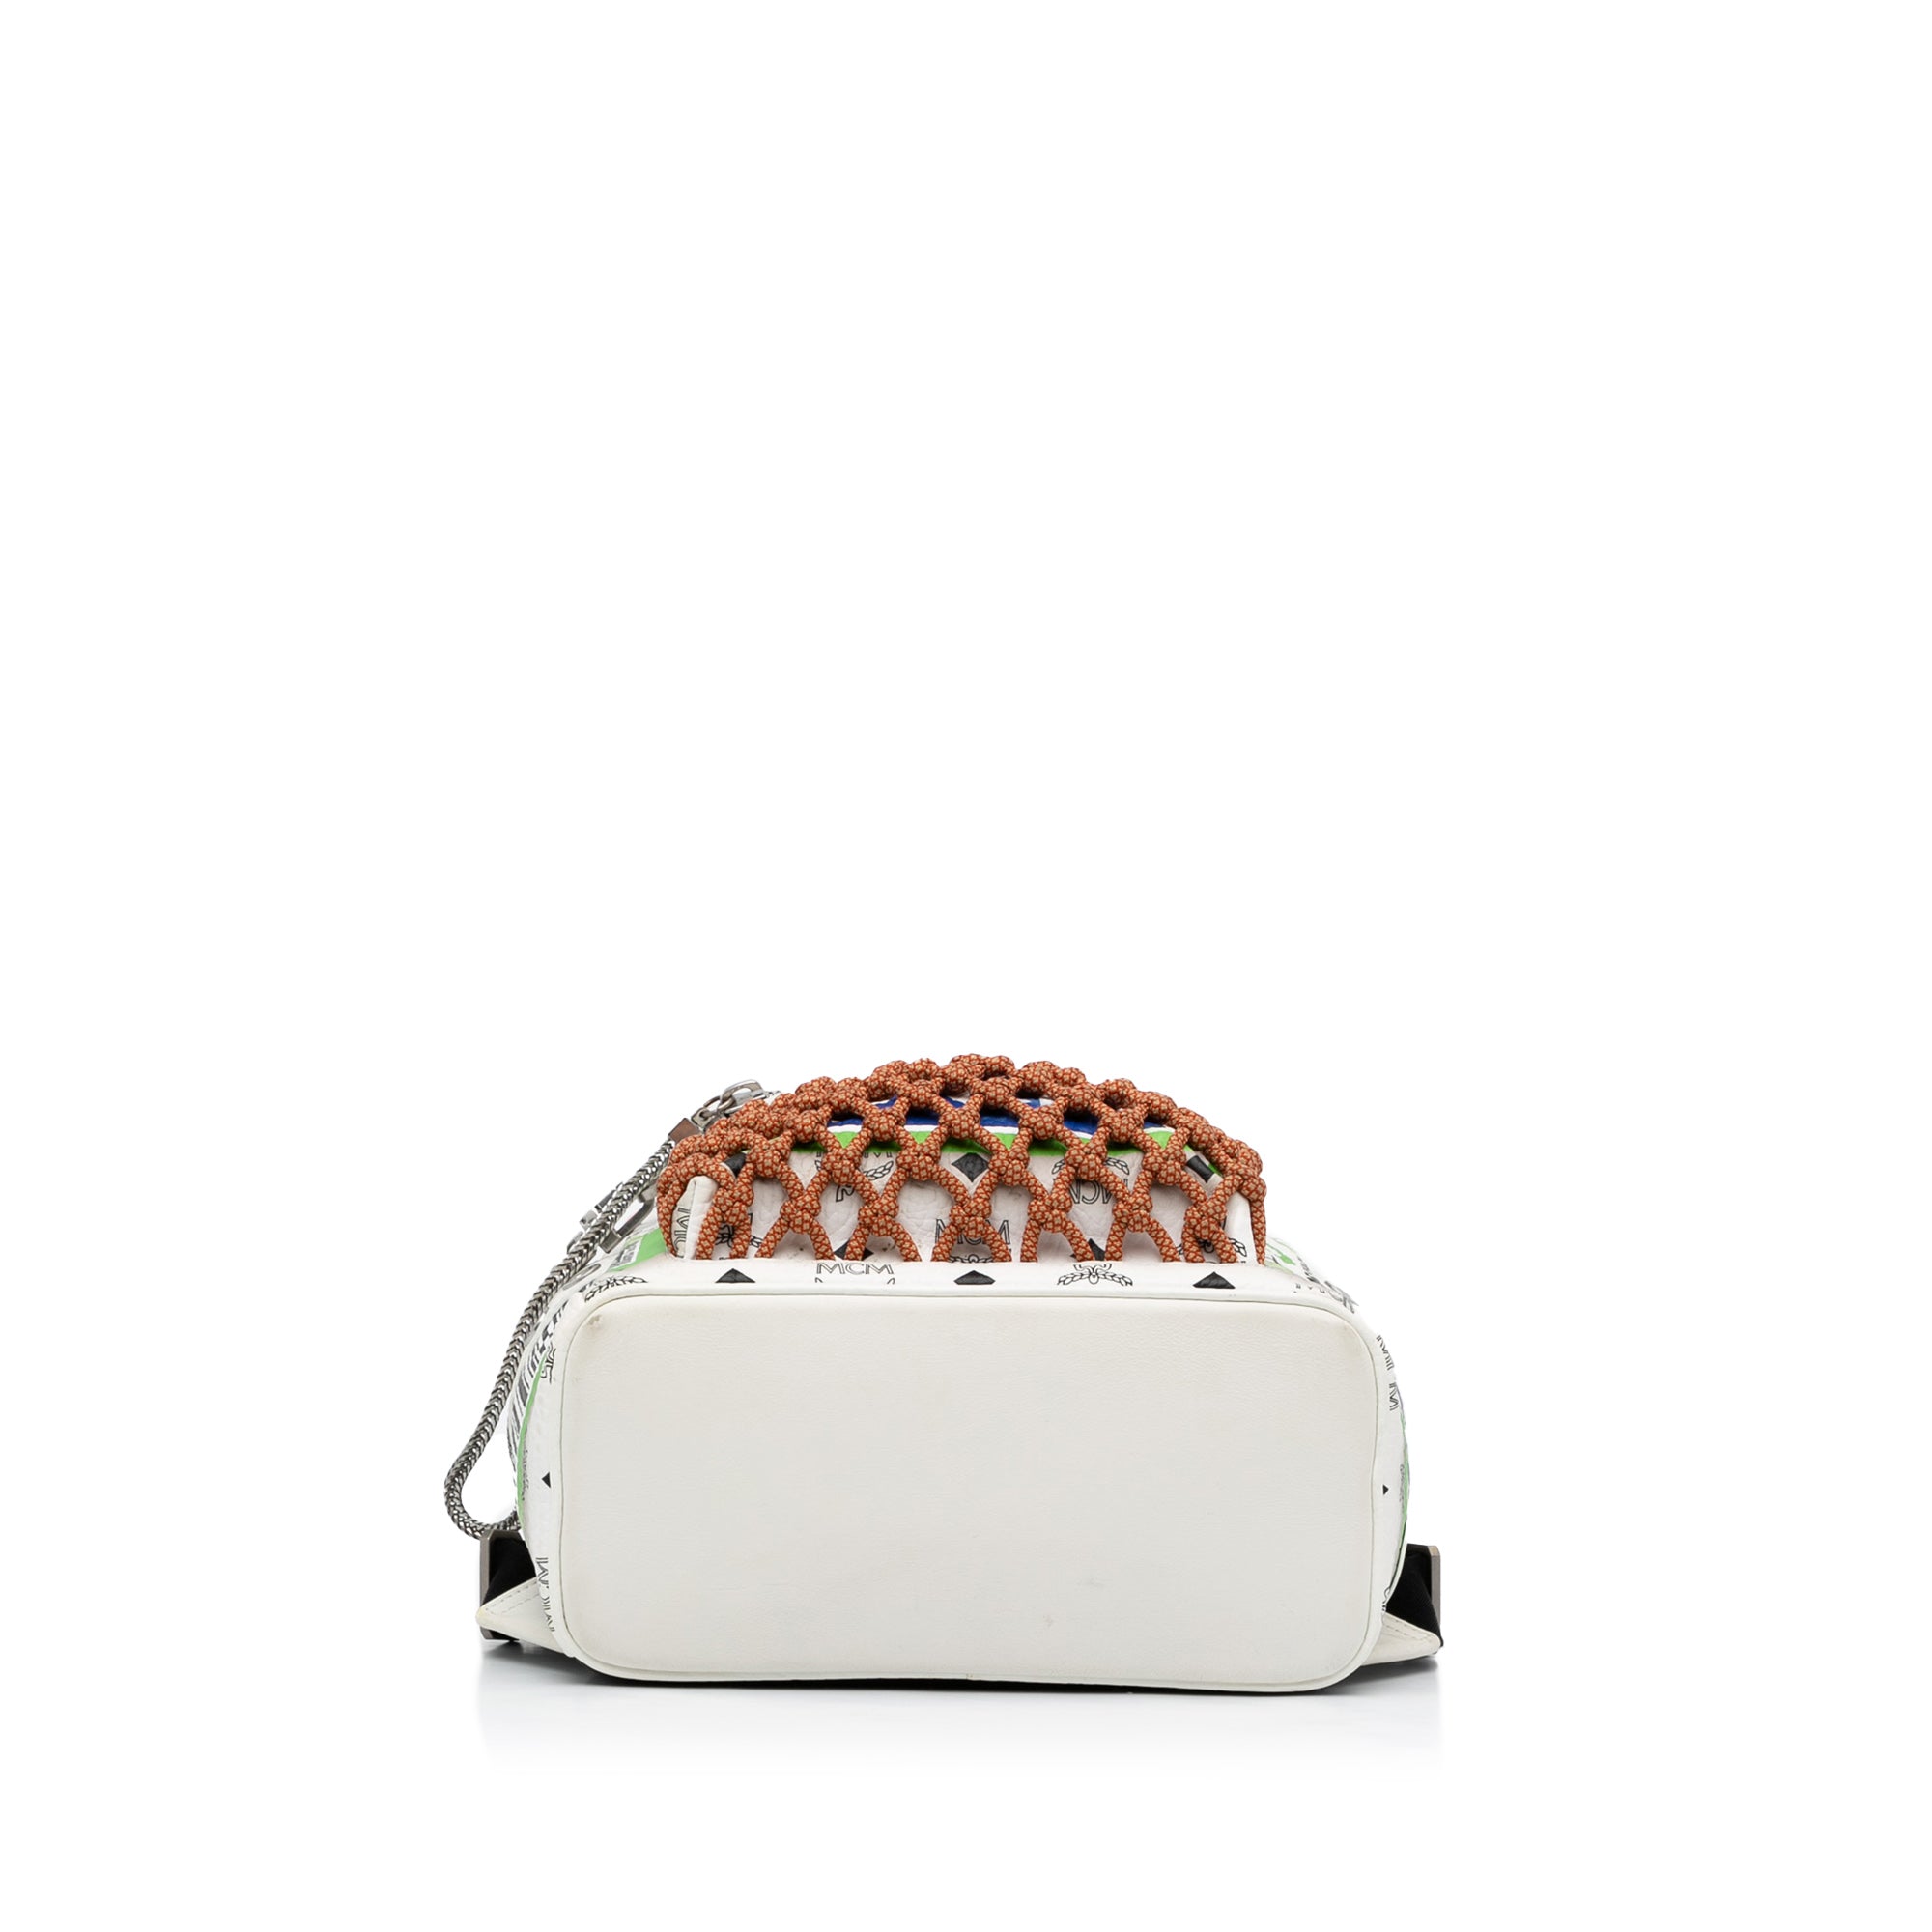 Stark White Backpack, Deux Lux Bags  Nwt in Bag Chic Backpack Stock Image  - Image of handbags, luxury: 163943359